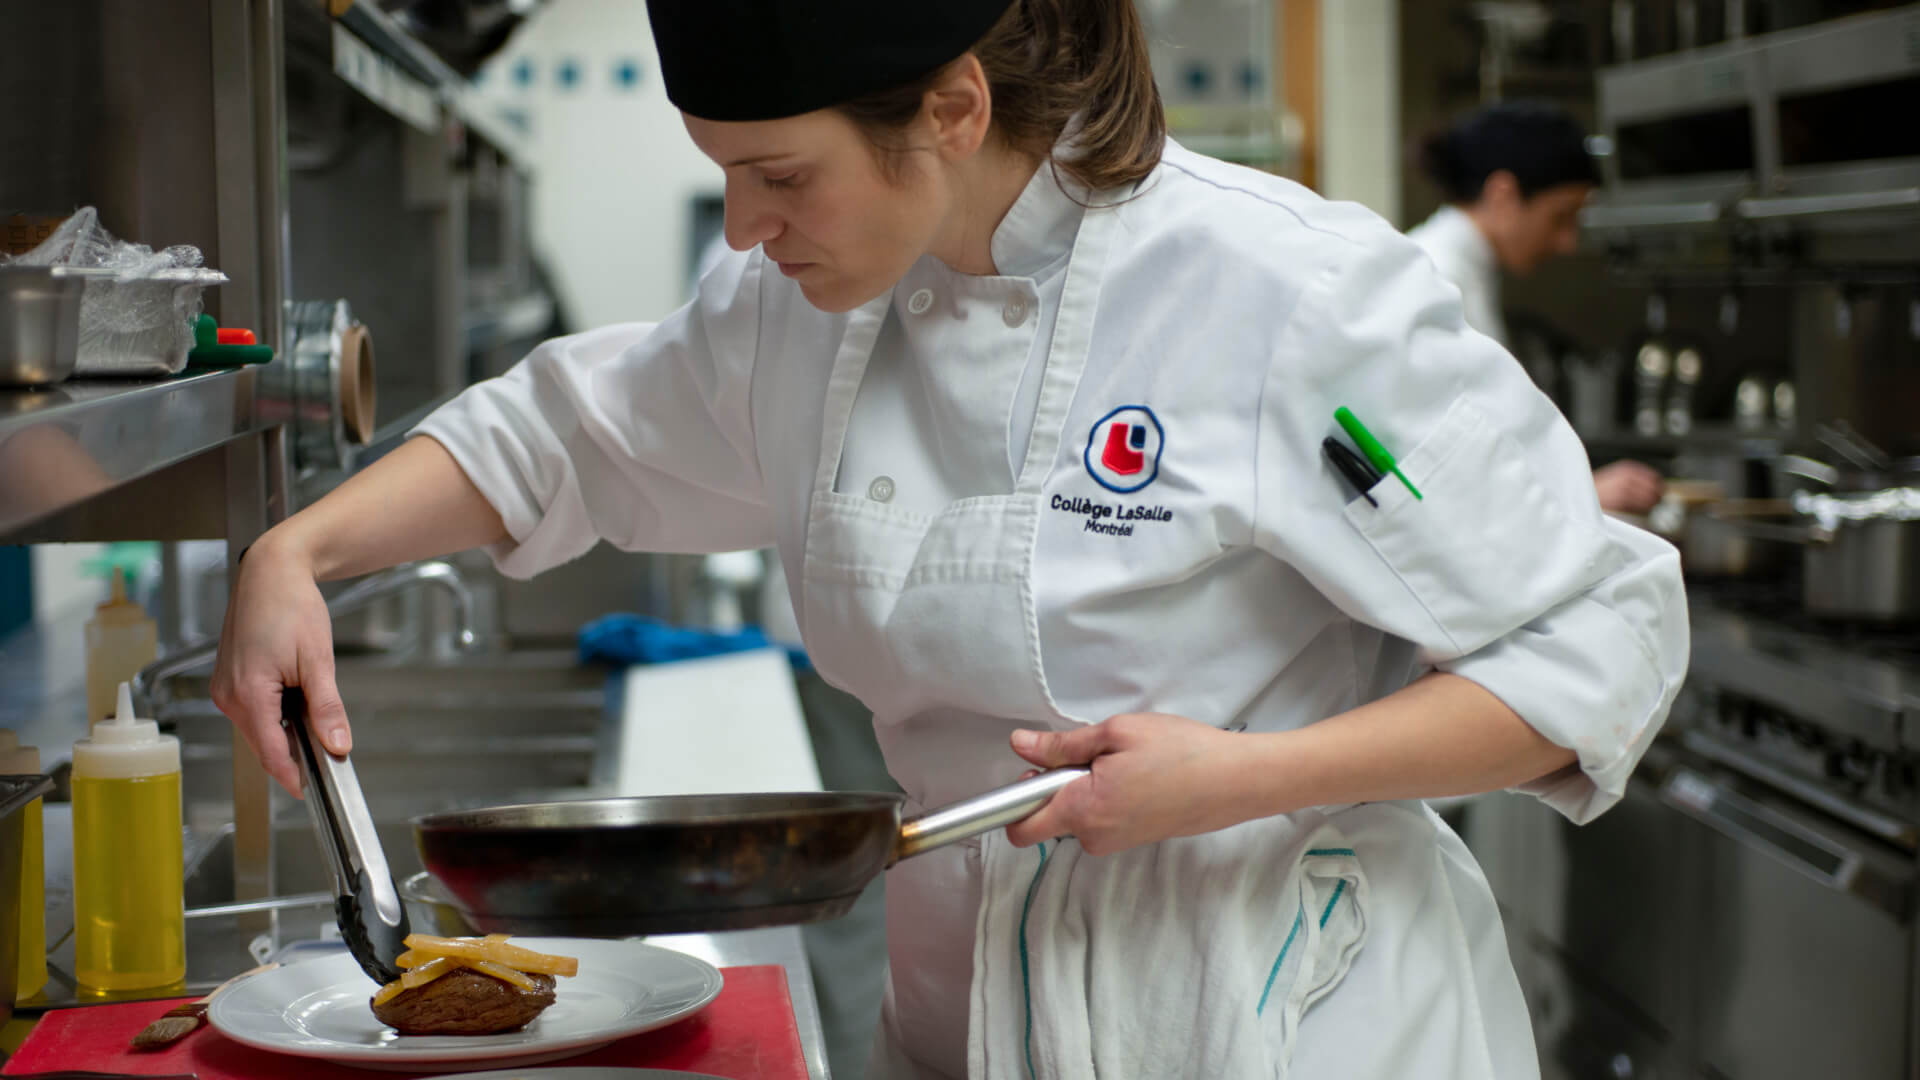 A dedicated culinary student at LaSalle College expertly plates a dish, focused on detail in a bustling kitchen.